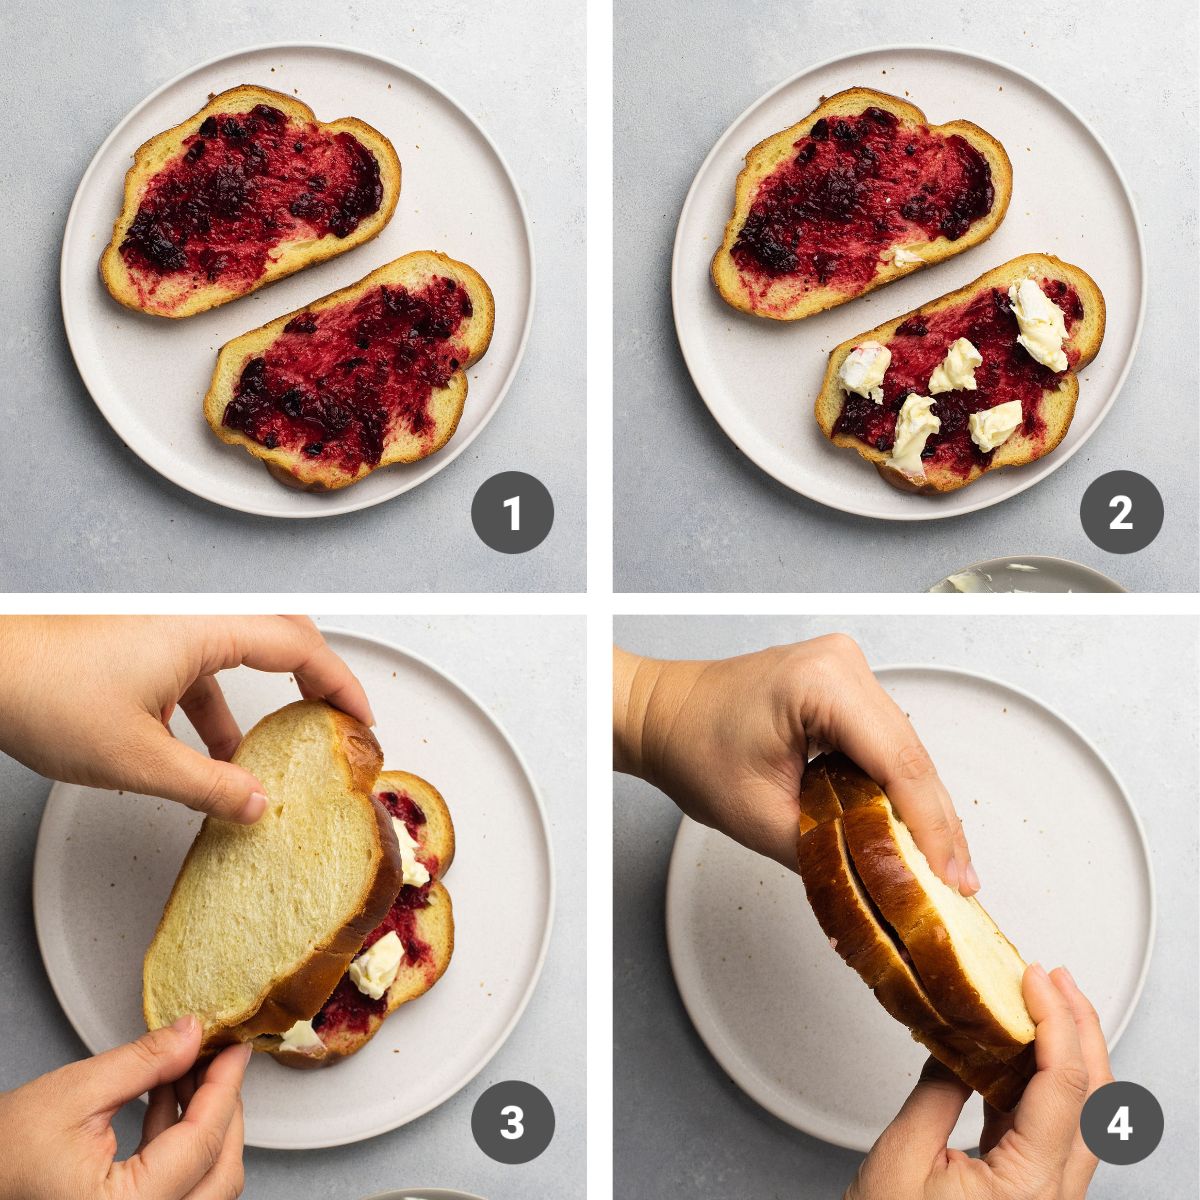 Layering cranberry sauce and brie onto slices of challah bread.